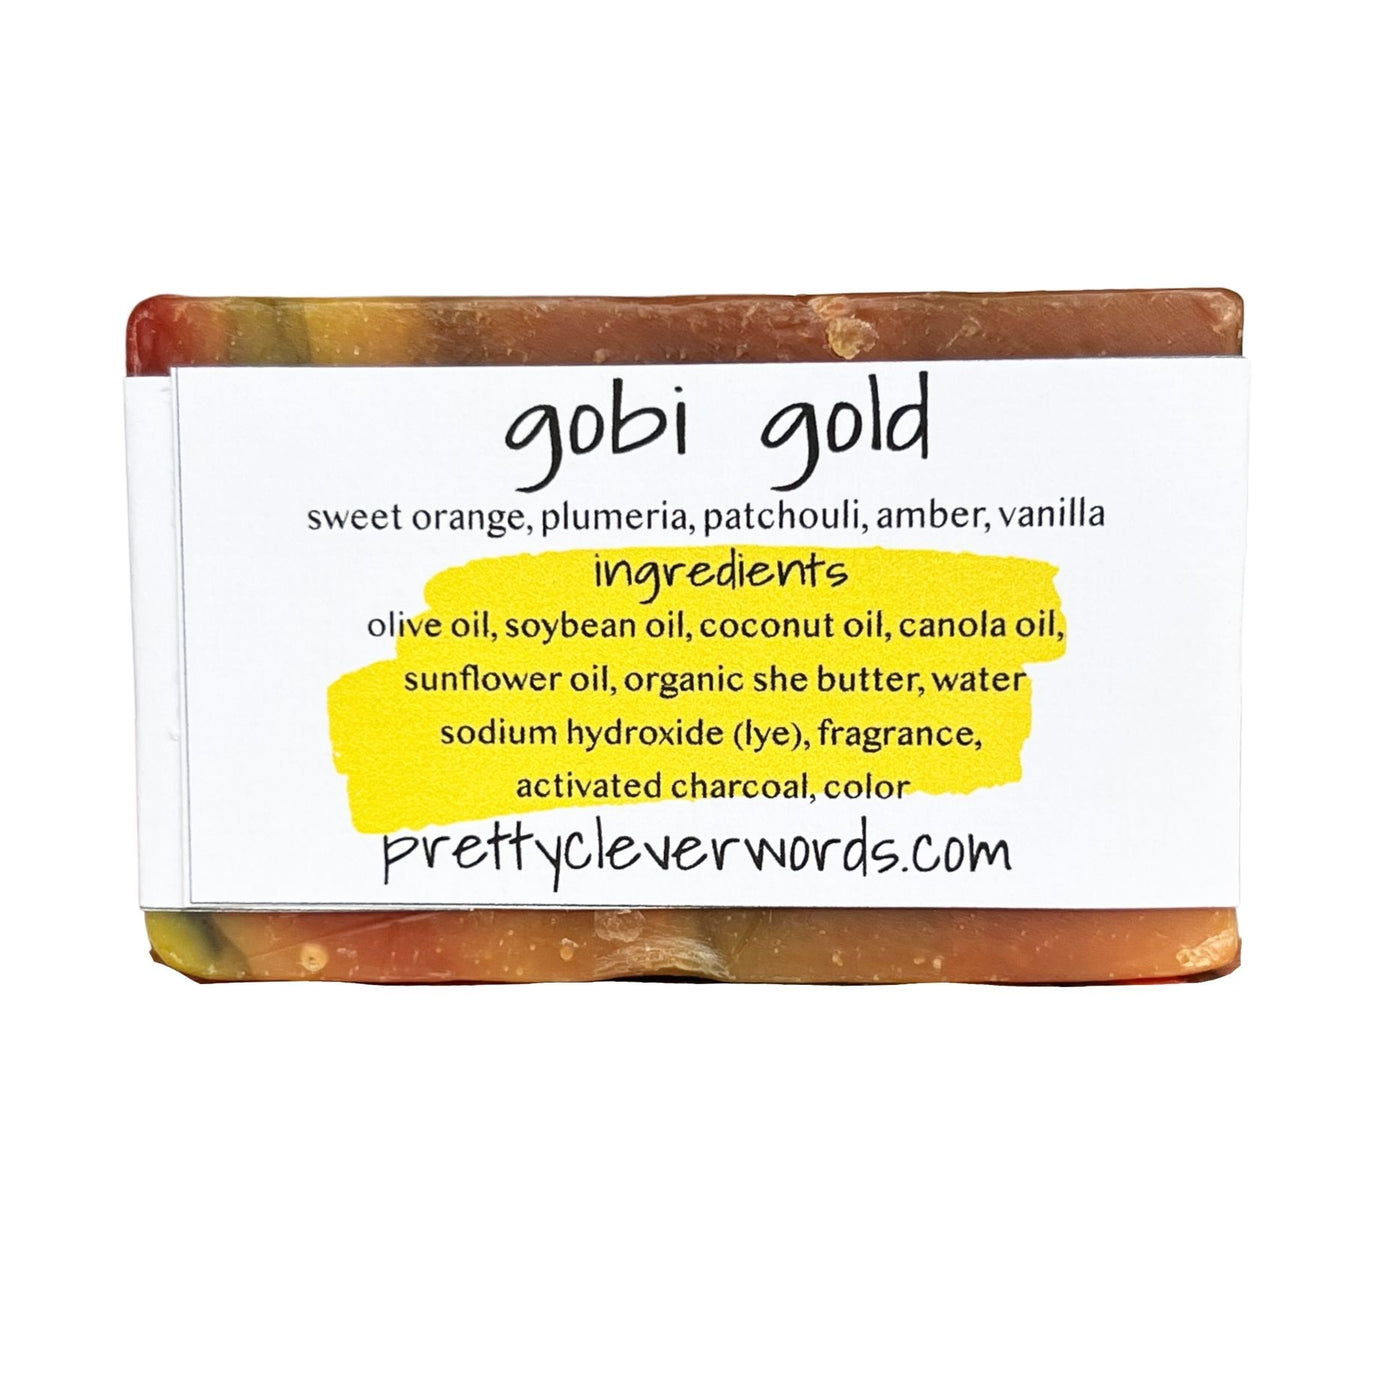 clever+clean gobi gold soap - if it takes a village to raise a child, is there a number to call?